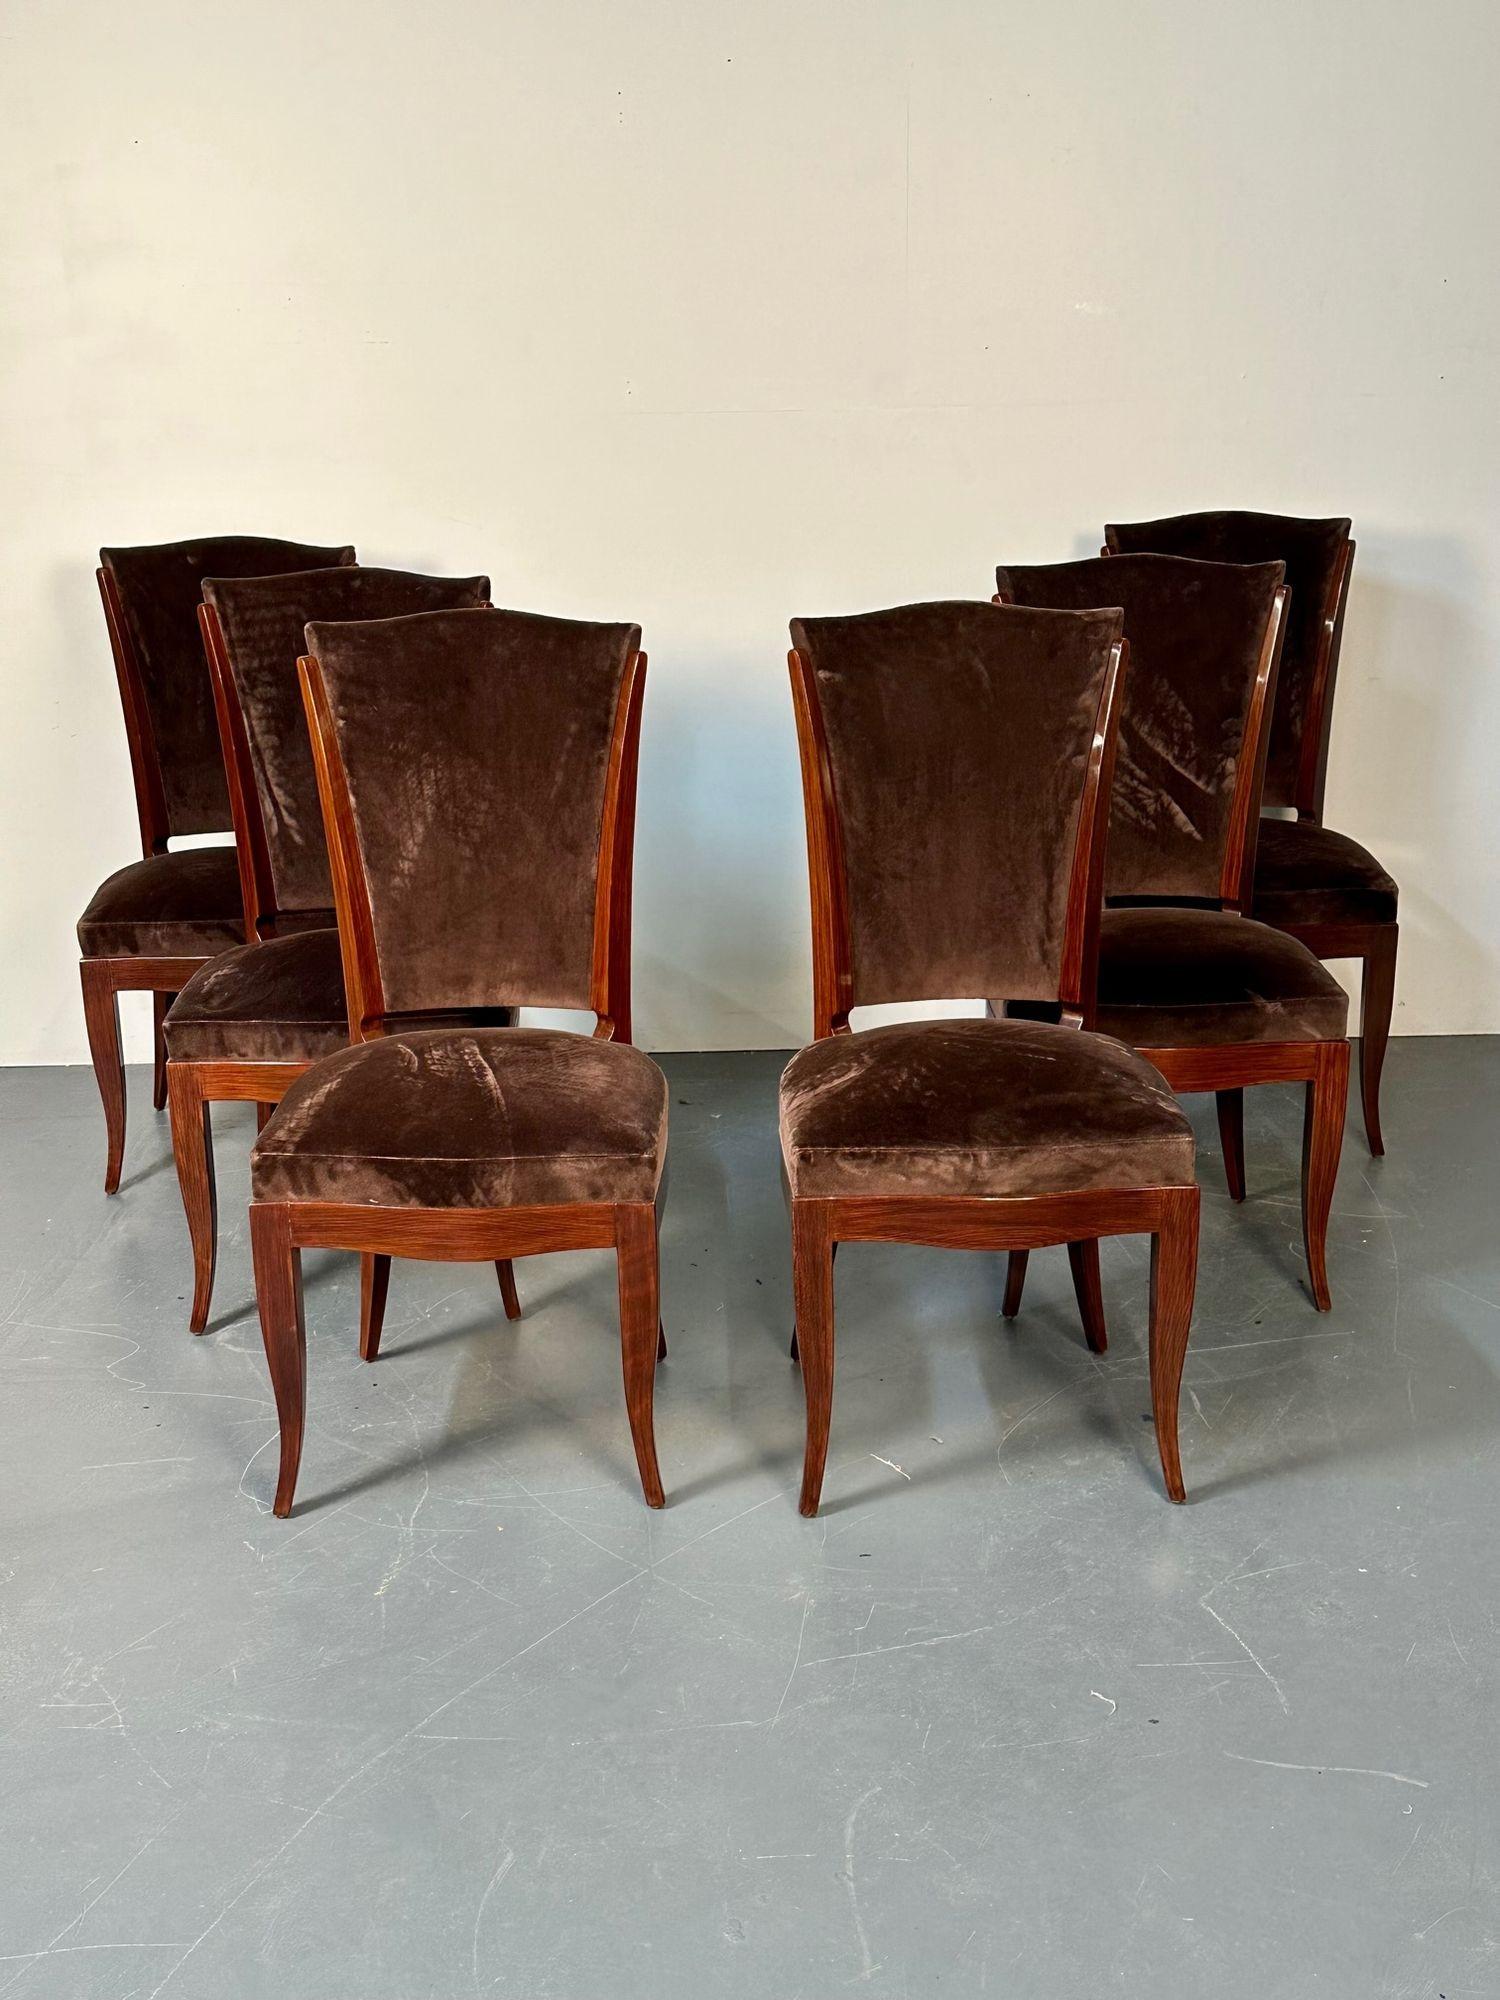 Six French Art Deco Walnut Dining / Side Chairs, Brown Velvet, Ruhlman Style In Good Condition For Sale In Stamford, CT